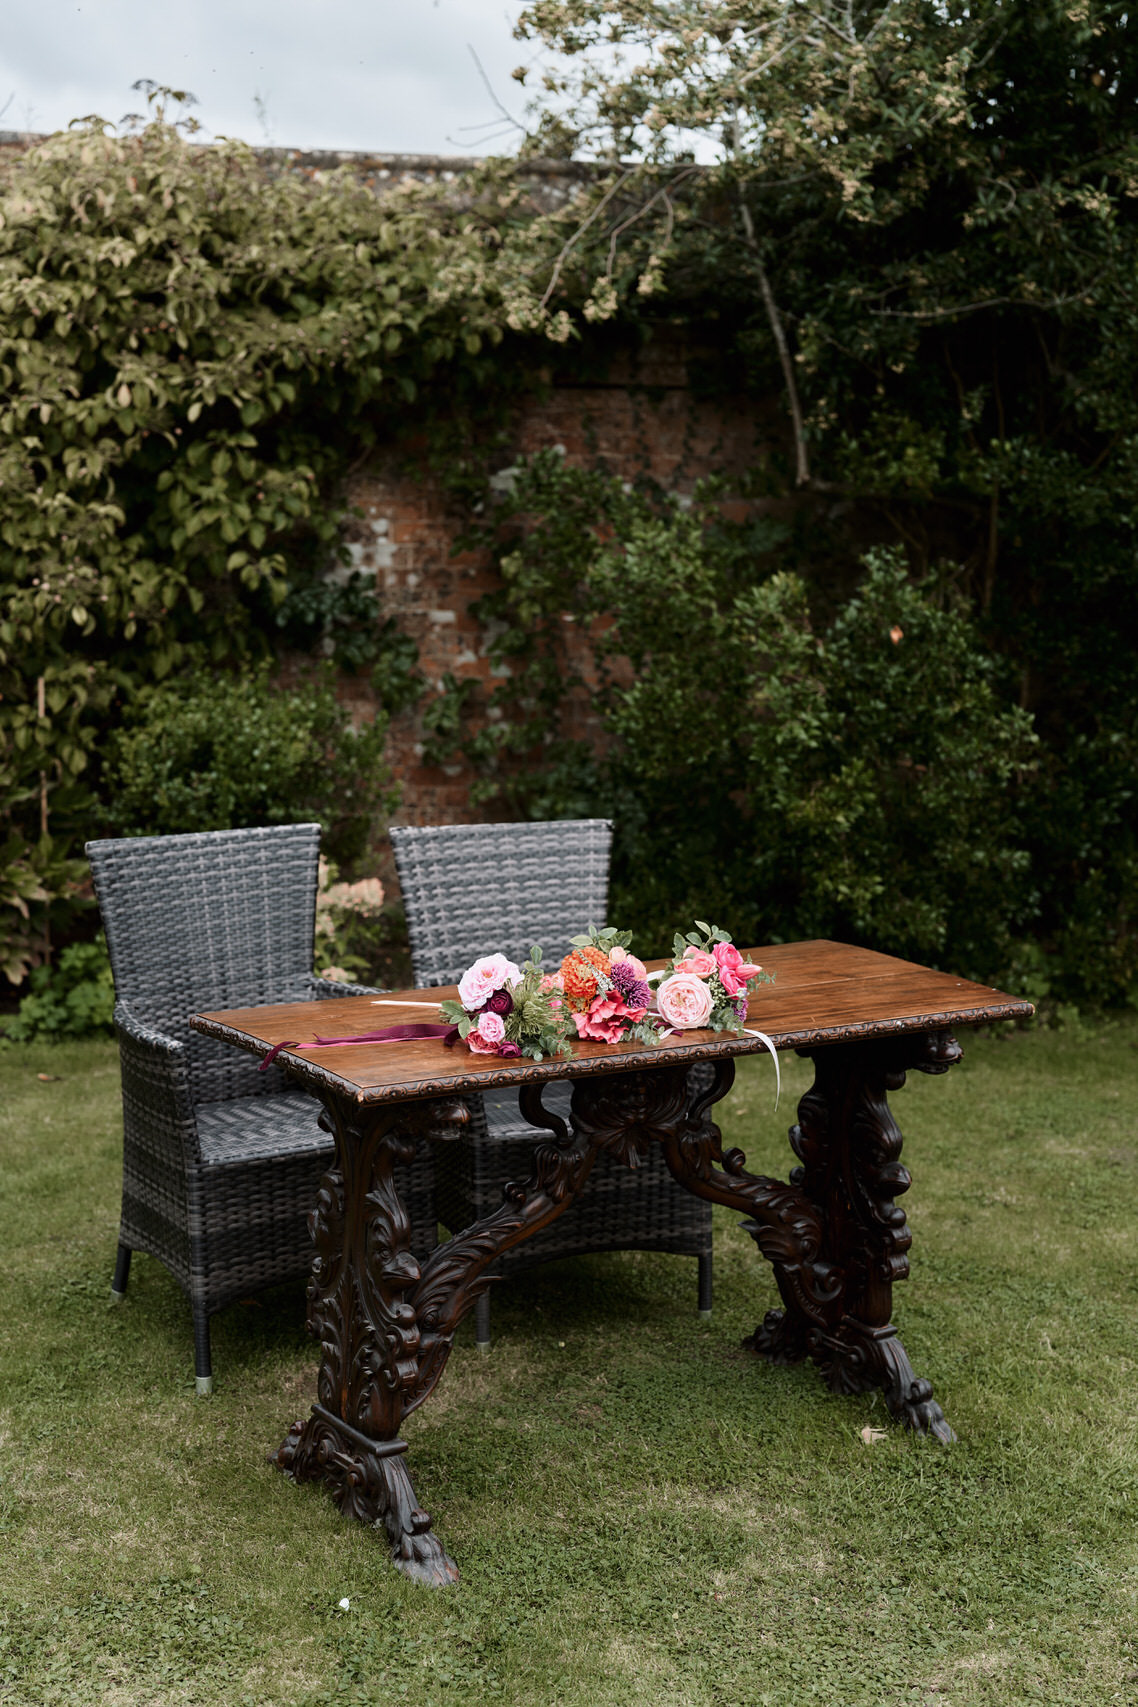 A garden table made of wood with chairs that are woven.